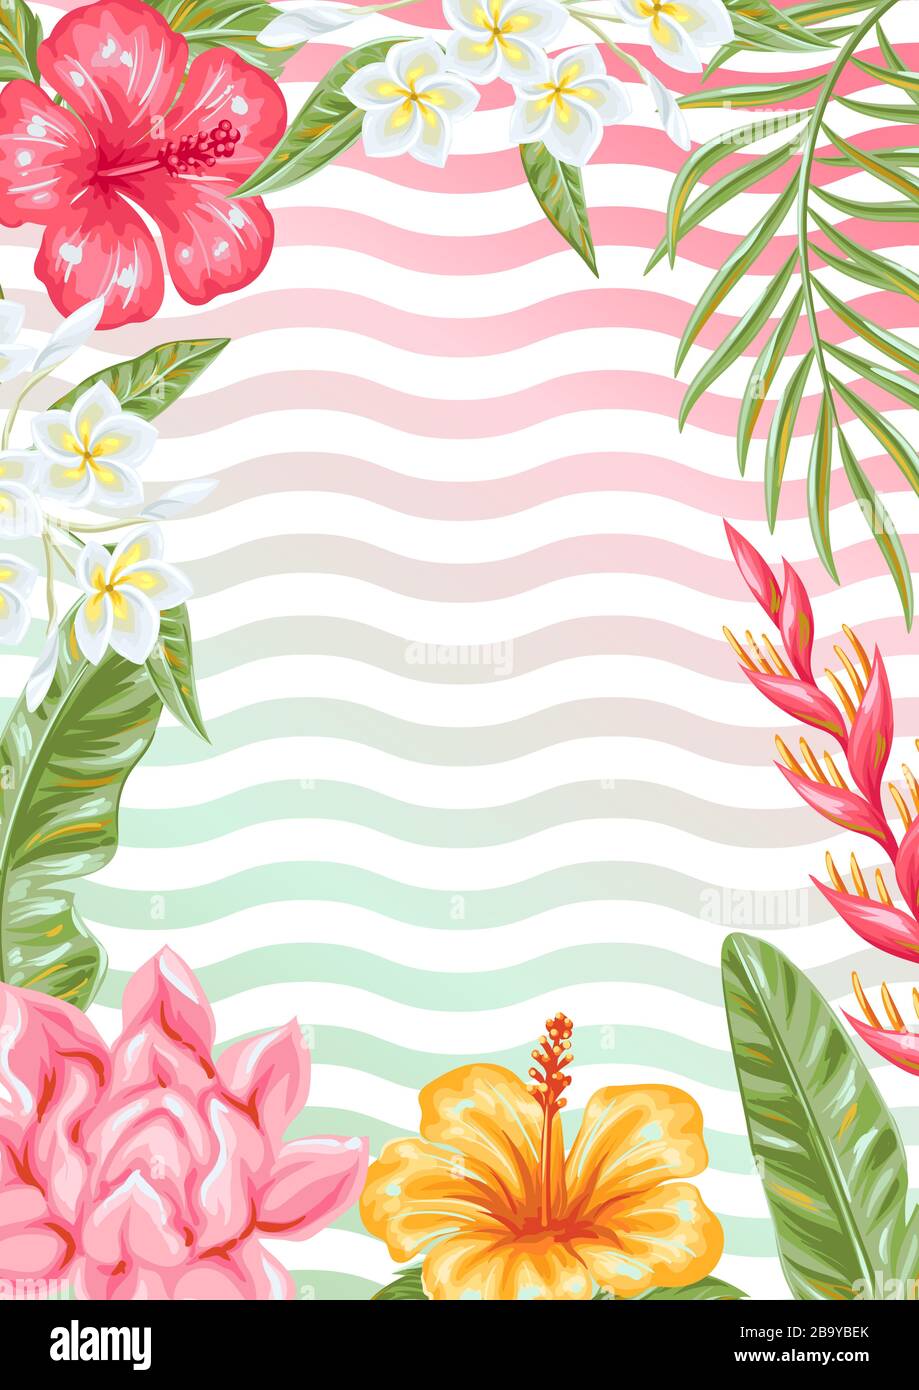 Floral seamless pattern tropical flower background